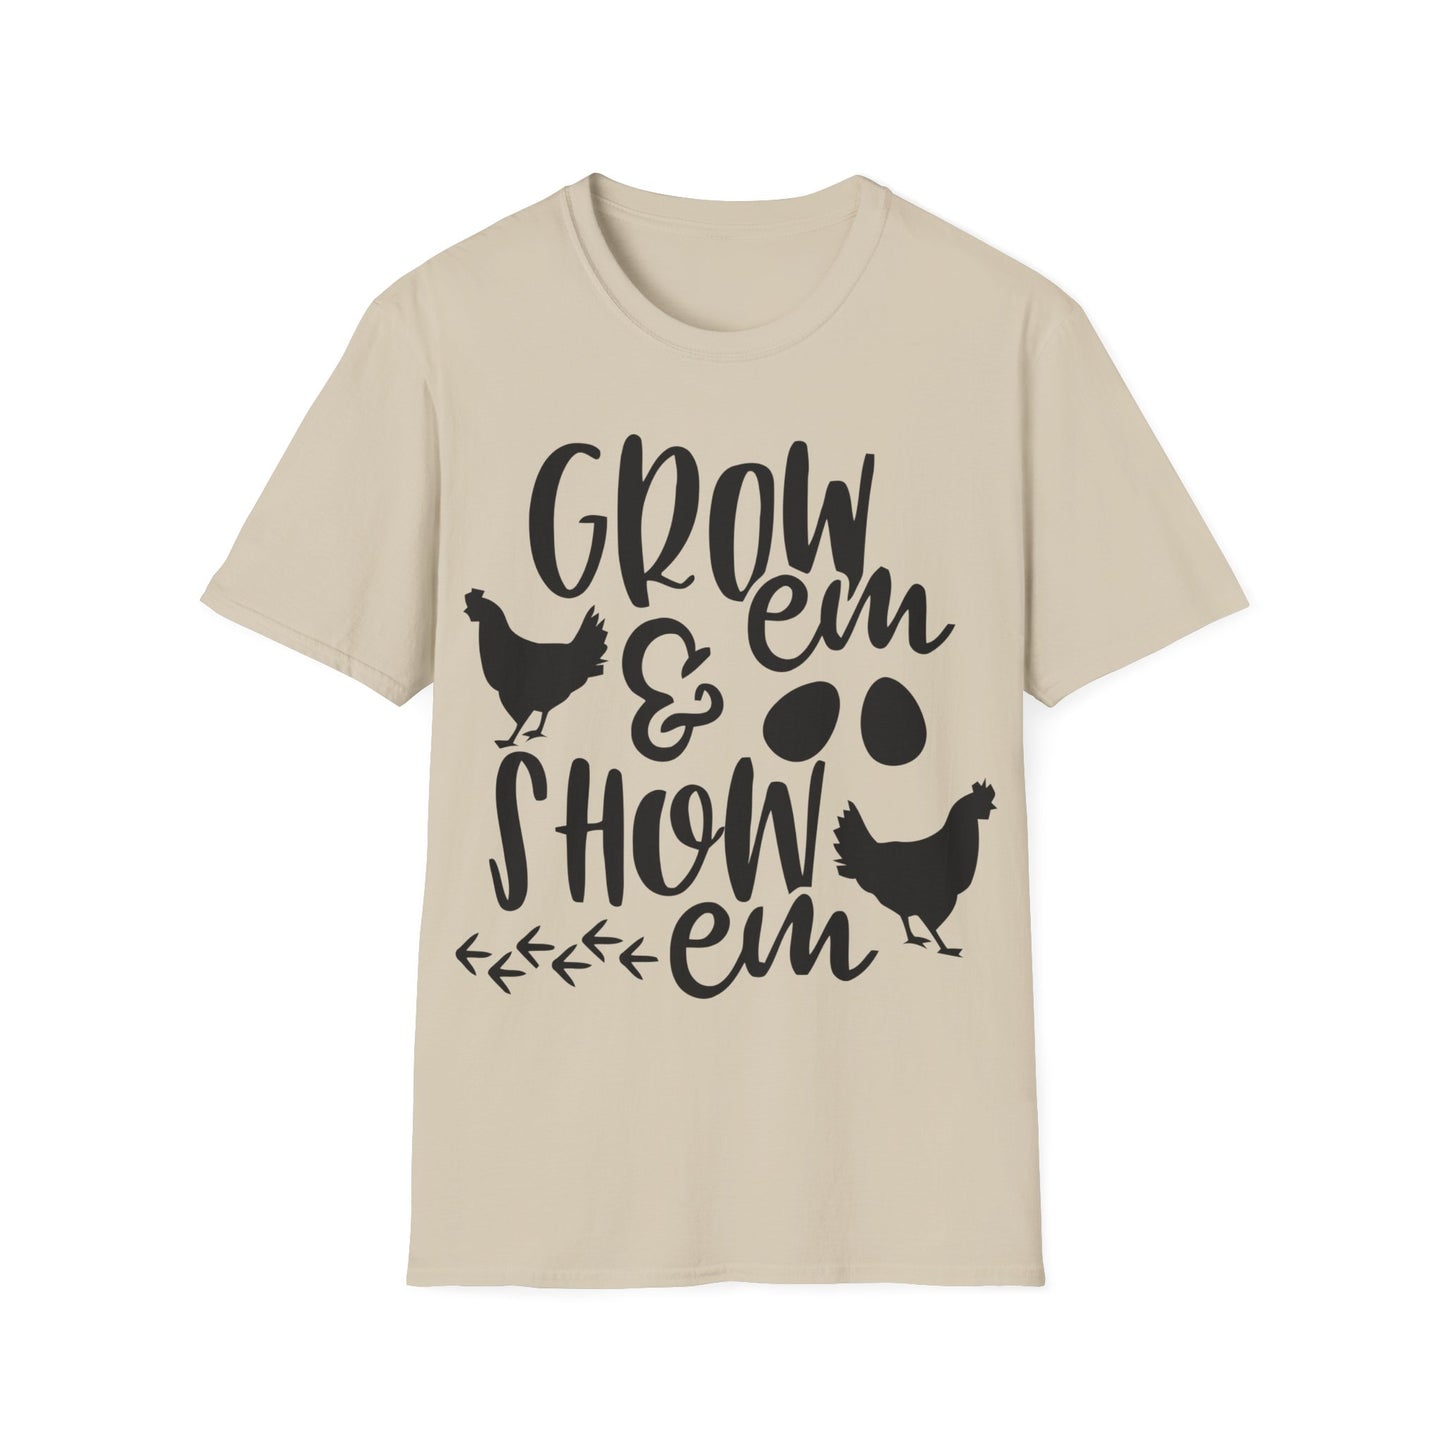 Unisex Softstyle T-Shirt - Grow Show Chickens